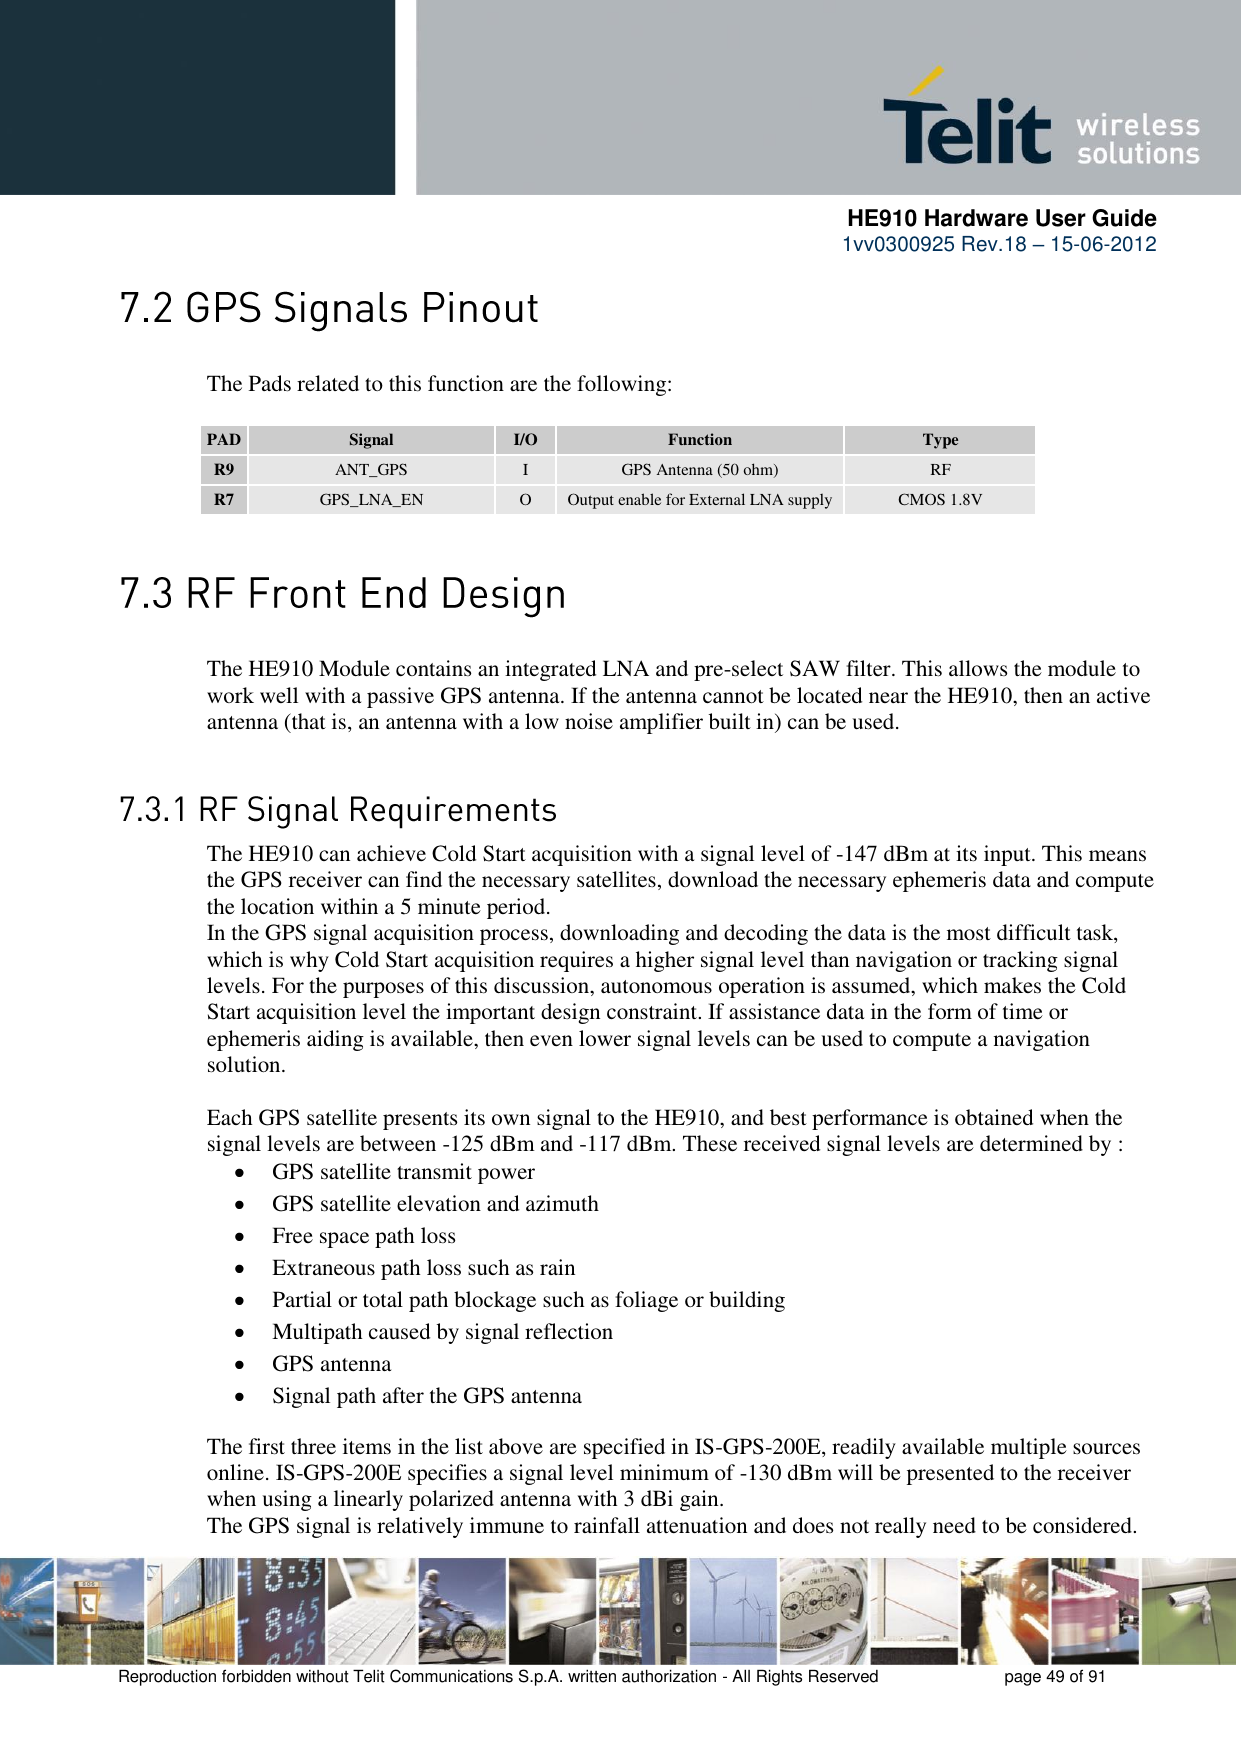      HE910 Hardware User Guide 1vv0300925 Rev.18 – 15-06-2012    Reproduction forbidden without Telit Communications S.p.A. written authorization - All Rights Reserved    page 49 of 91   The Pads related to this function are the following:  PAD Signal I/O Function Type R9 ANT_GPS I GPS Antenna (50 ohm) RF R7 GPS_LNA_EN O Output enable for External LNA supply CMOS 1.8V   The HE910 Module contains an integrated LNA and pre-select SAW filter. This allows the module to work well with a passive GPS antenna. If the antenna cannot be located near the HE910, then an active antenna (that is, an antenna with a low noise amplifier built in) can be used.    The HE910 can achieve Cold Start acquisition with a signal level of -147 dBm at its input. This means the GPS receiver can find the necessary satellites, download the necessary ephemeris data and compute the location within a 5 minute period.  In the GPS signal acquisition process, downloading and decoding the data is the most difficult task, which is why Cold Start acquisition requires a higher signal level than navigation or tracking signal levels. For the purposes of this discussion, autonomous operation is assumed, which makes the Cold Start acquisition level the important design constraint. If assistance data in the form of time or ephemeris aiding is available, then even lower signal levels can be used to compute a navigation solution.  Each GPS satellite presents its own signal to the HE910, and best performance is obtained when the signal levels are between -125 dBm and -117 dBm. These received signal levels are determined by :  GPS satellite transmit power  GPS satellite elevation and azimuth  Free space path loss  Extraneous path loss such as rain  Partial or total path blockage such as foliage or building  Multipath caused by signal reflection  GPS antenna  Signal path after the GPS antenna The first three items in the list above are specified in IS-GPS-200E, readily available multiple sources online. IS-GPS-200E specifies a signal level minimum of -130 dBm will be presented to the receiver when using a linearly polarized antenna with 3 dBi gain. The GPS signal is relatively immune to rainfall attenuation and does not really need to be considered. 